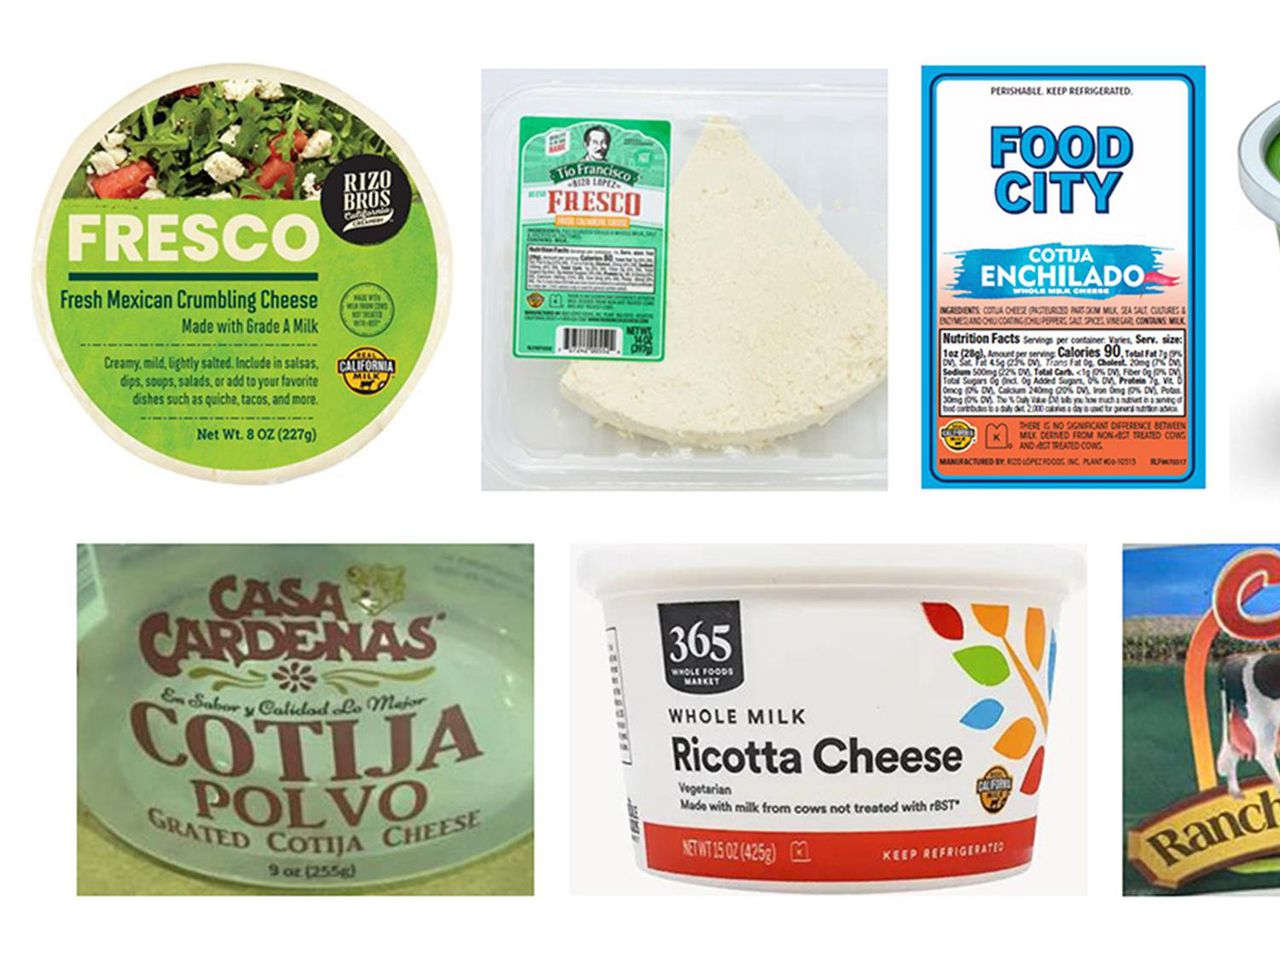 Newly recalled items associated with the listeria outbreak include bean dips, enchiladas, and taco kits.